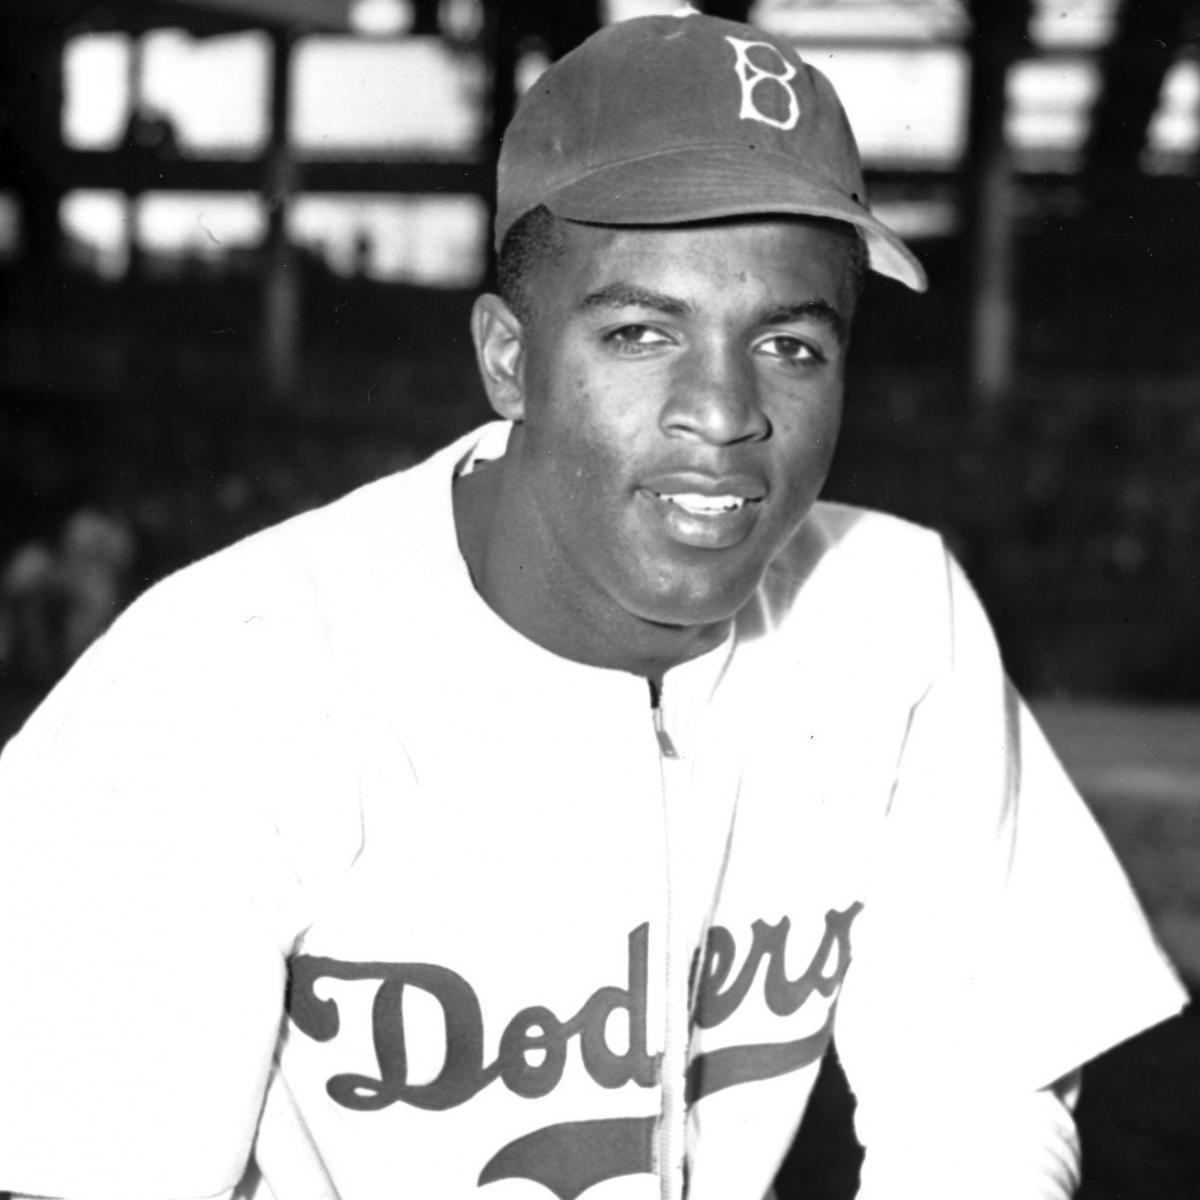 Jackie Robinson Jersey from Rookie Season Sells for $2.05M at